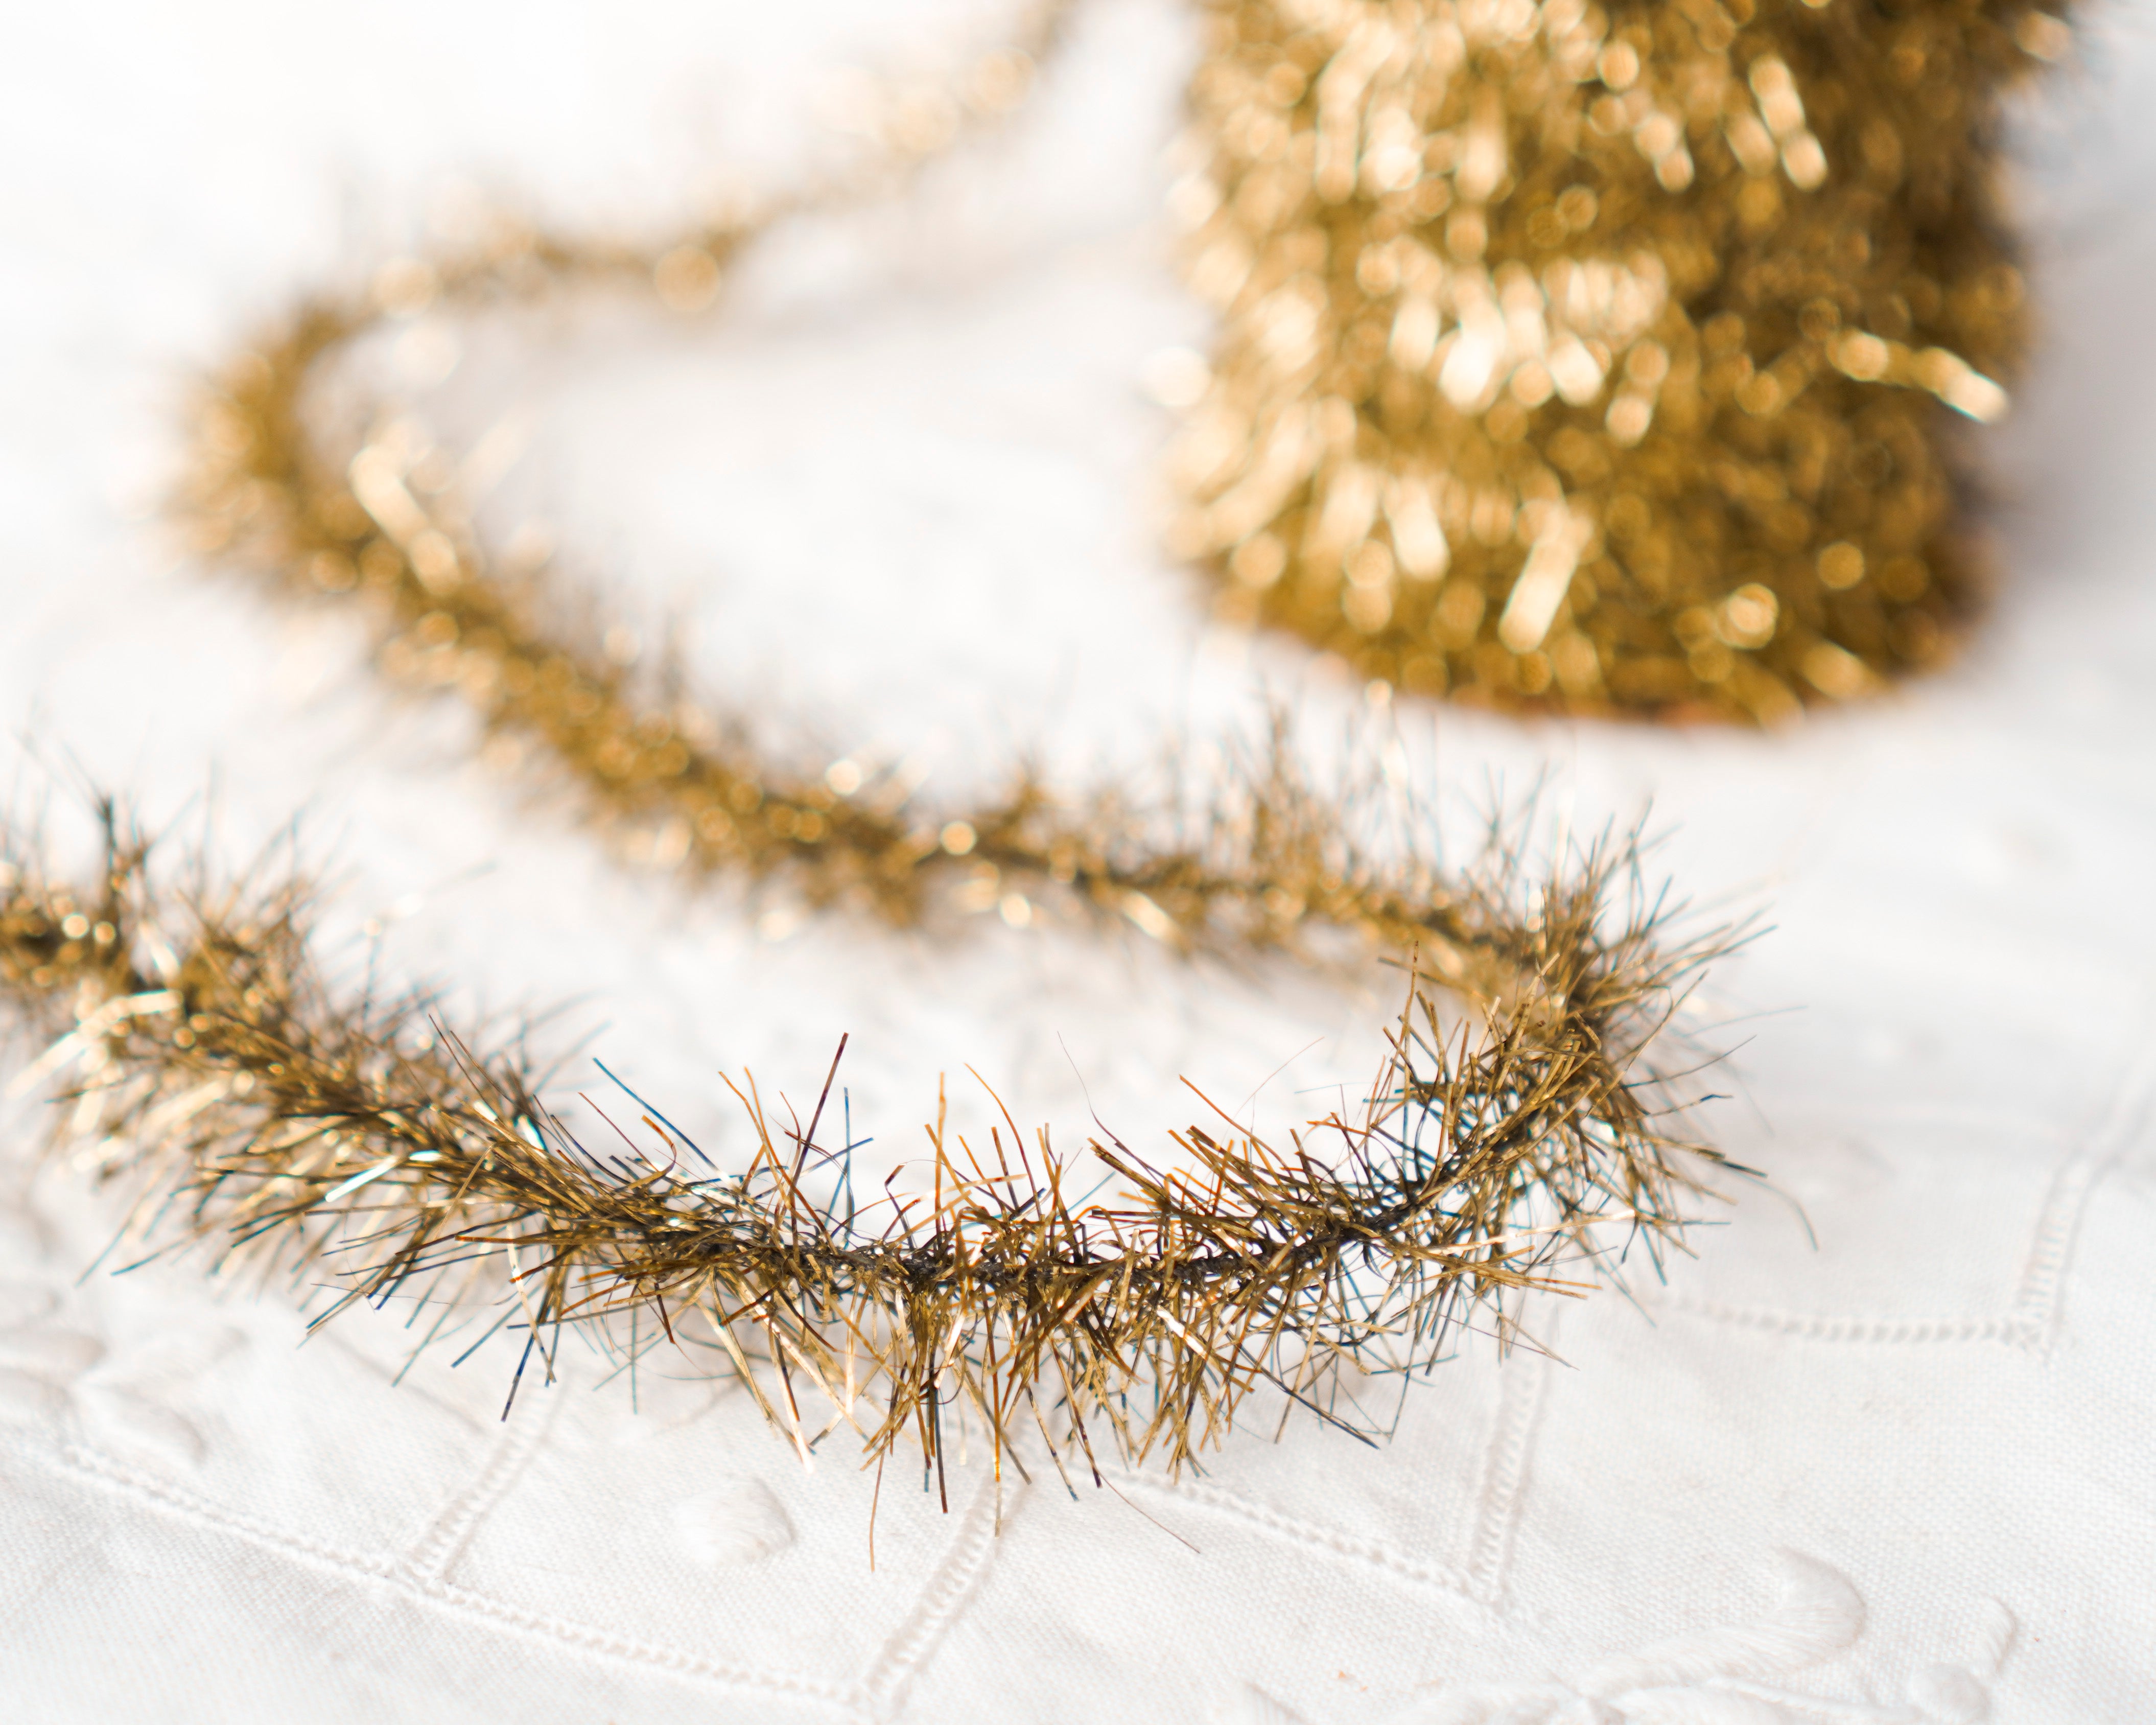 Tinsel Garland - Aged Gold Vintage Style Christmas Trim, 12 Foot Spool